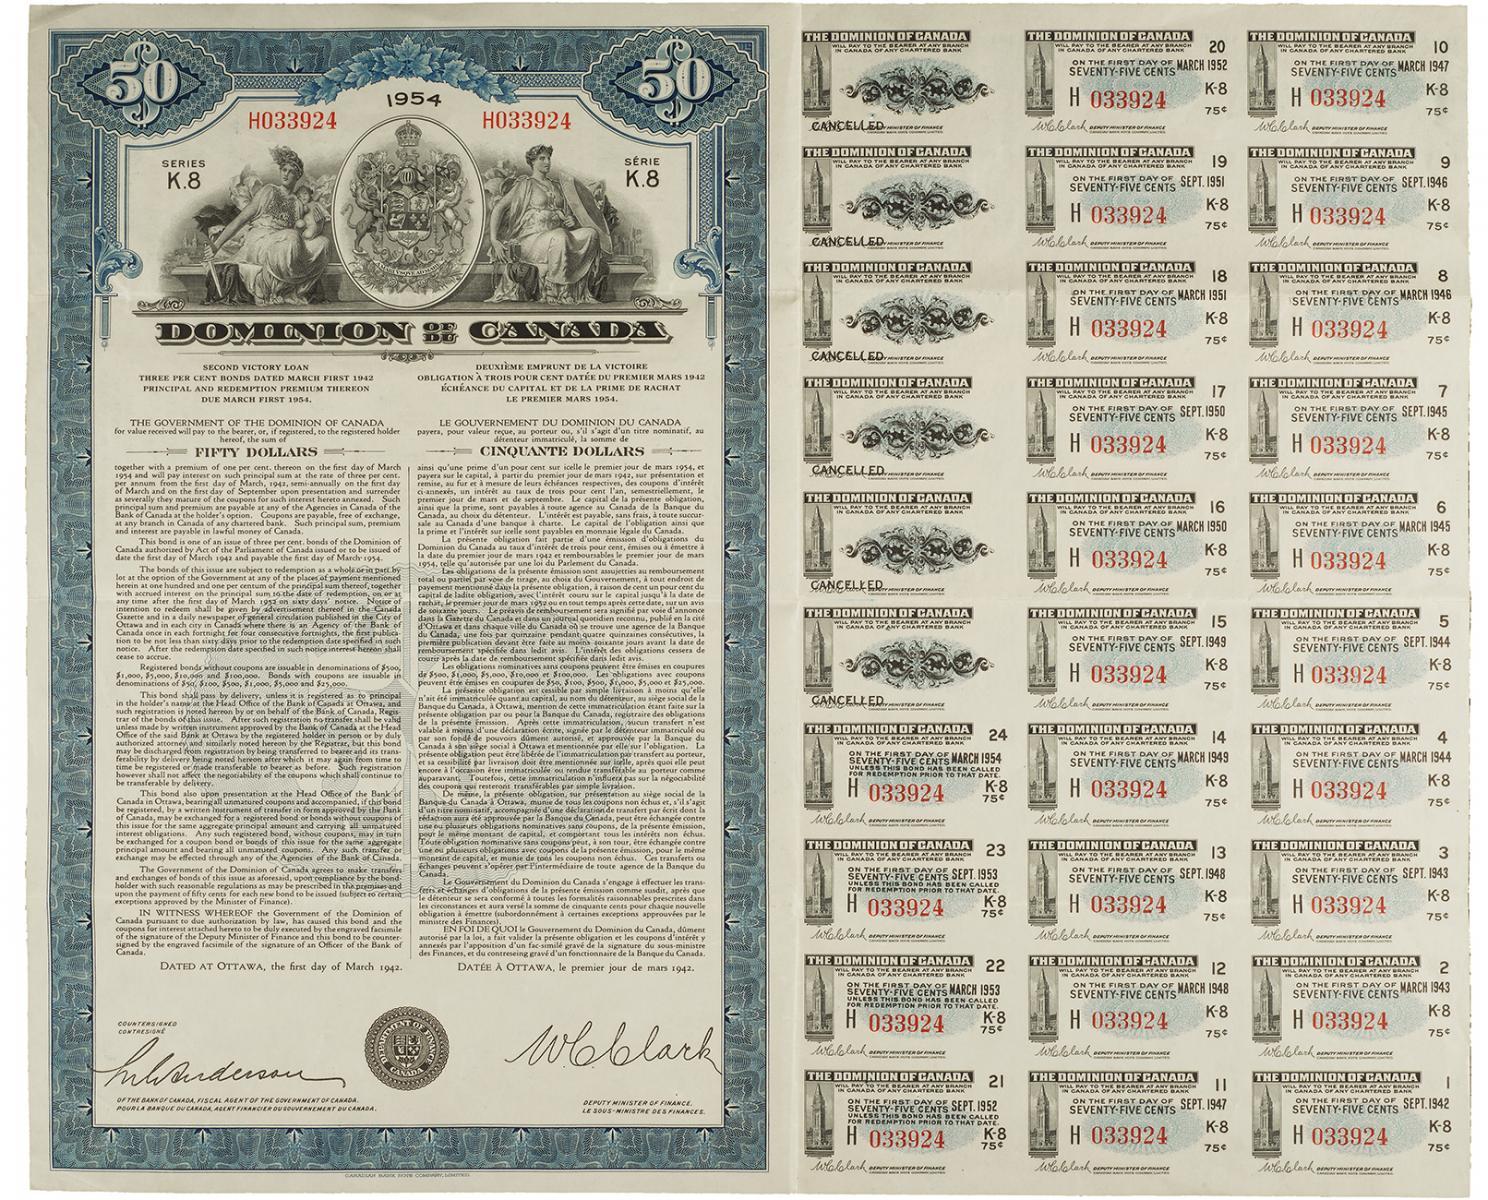 Certificate, elaborate geometrically patterned framework, with 30 tear-away coupons attached.